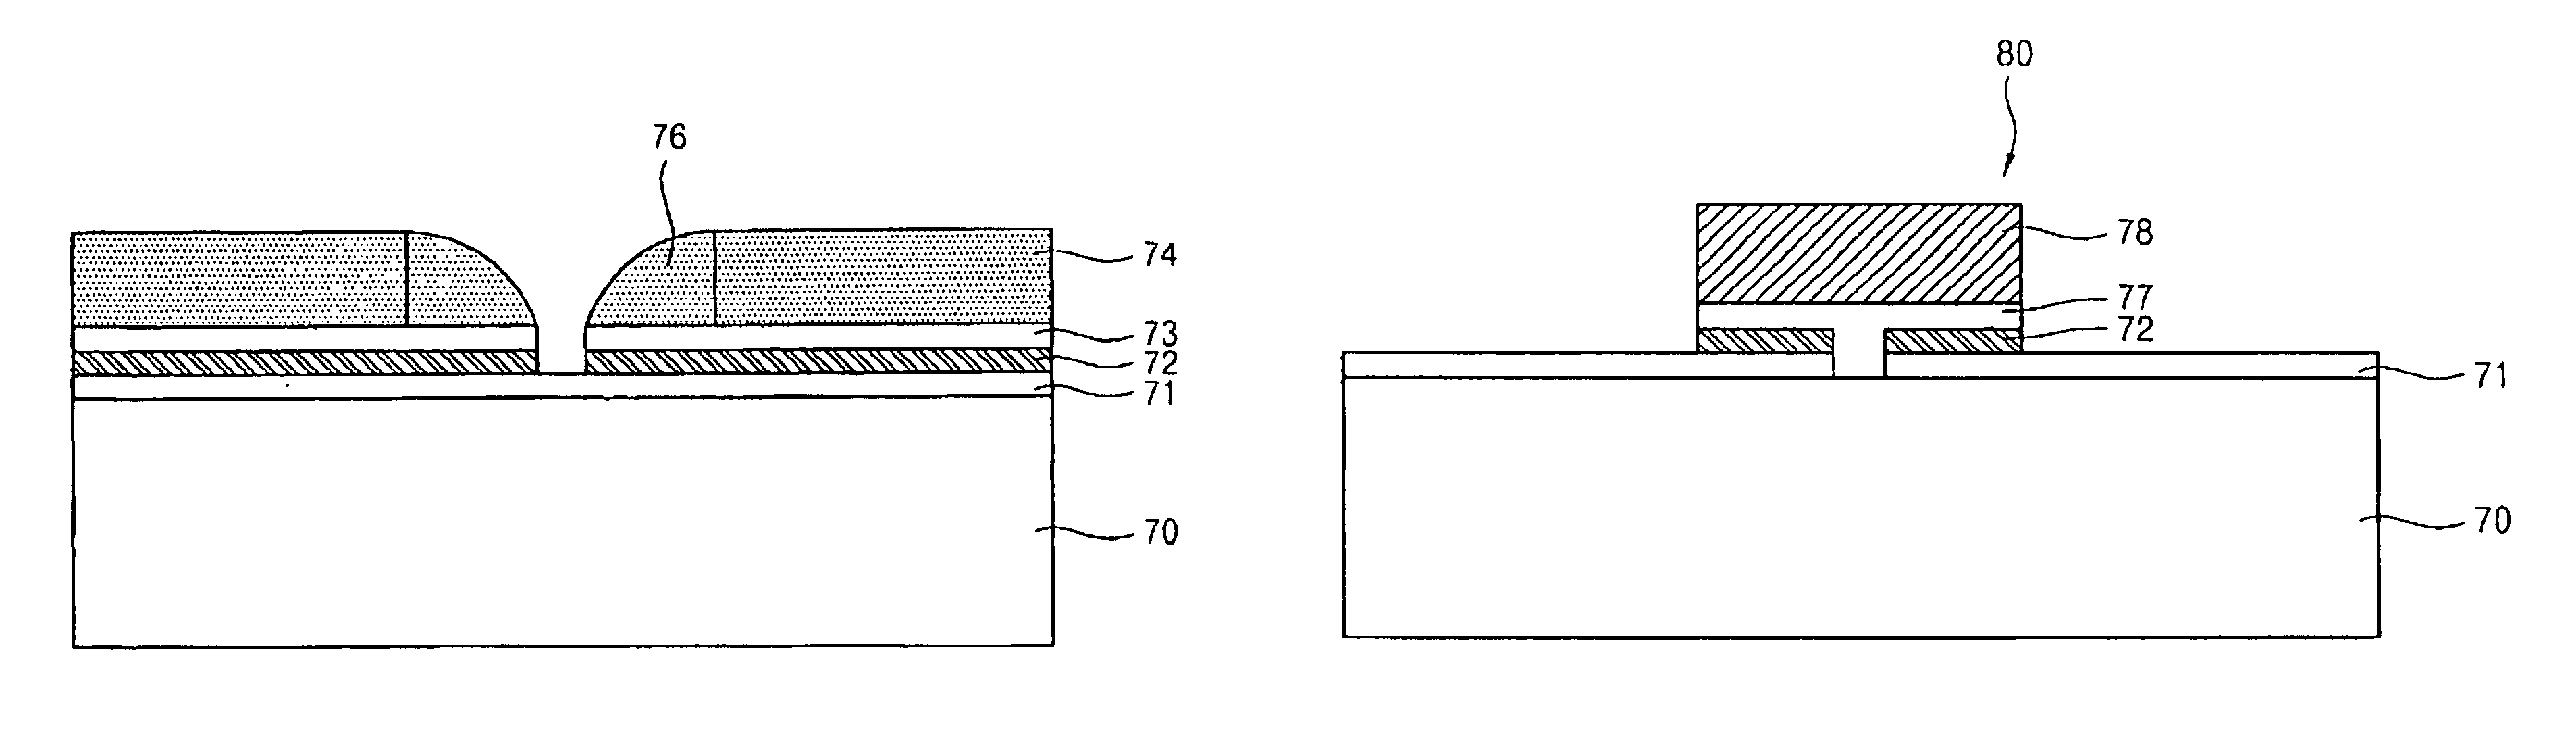 Method of manufacturing SONOS flash memory device